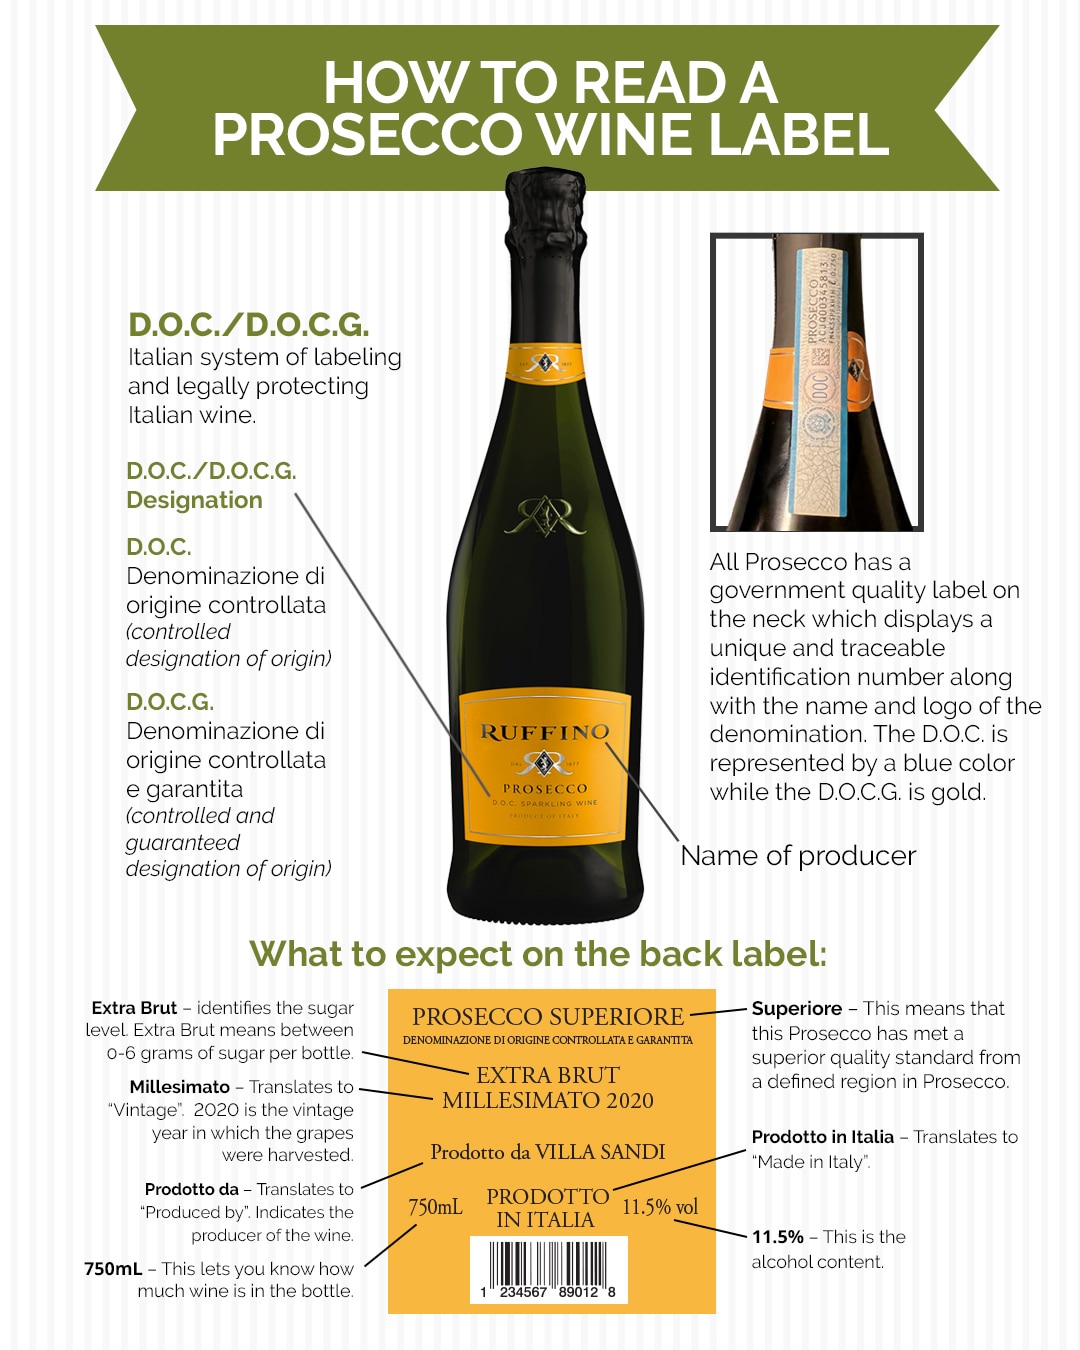 A diagram showing how to read a Prosecco wine label.